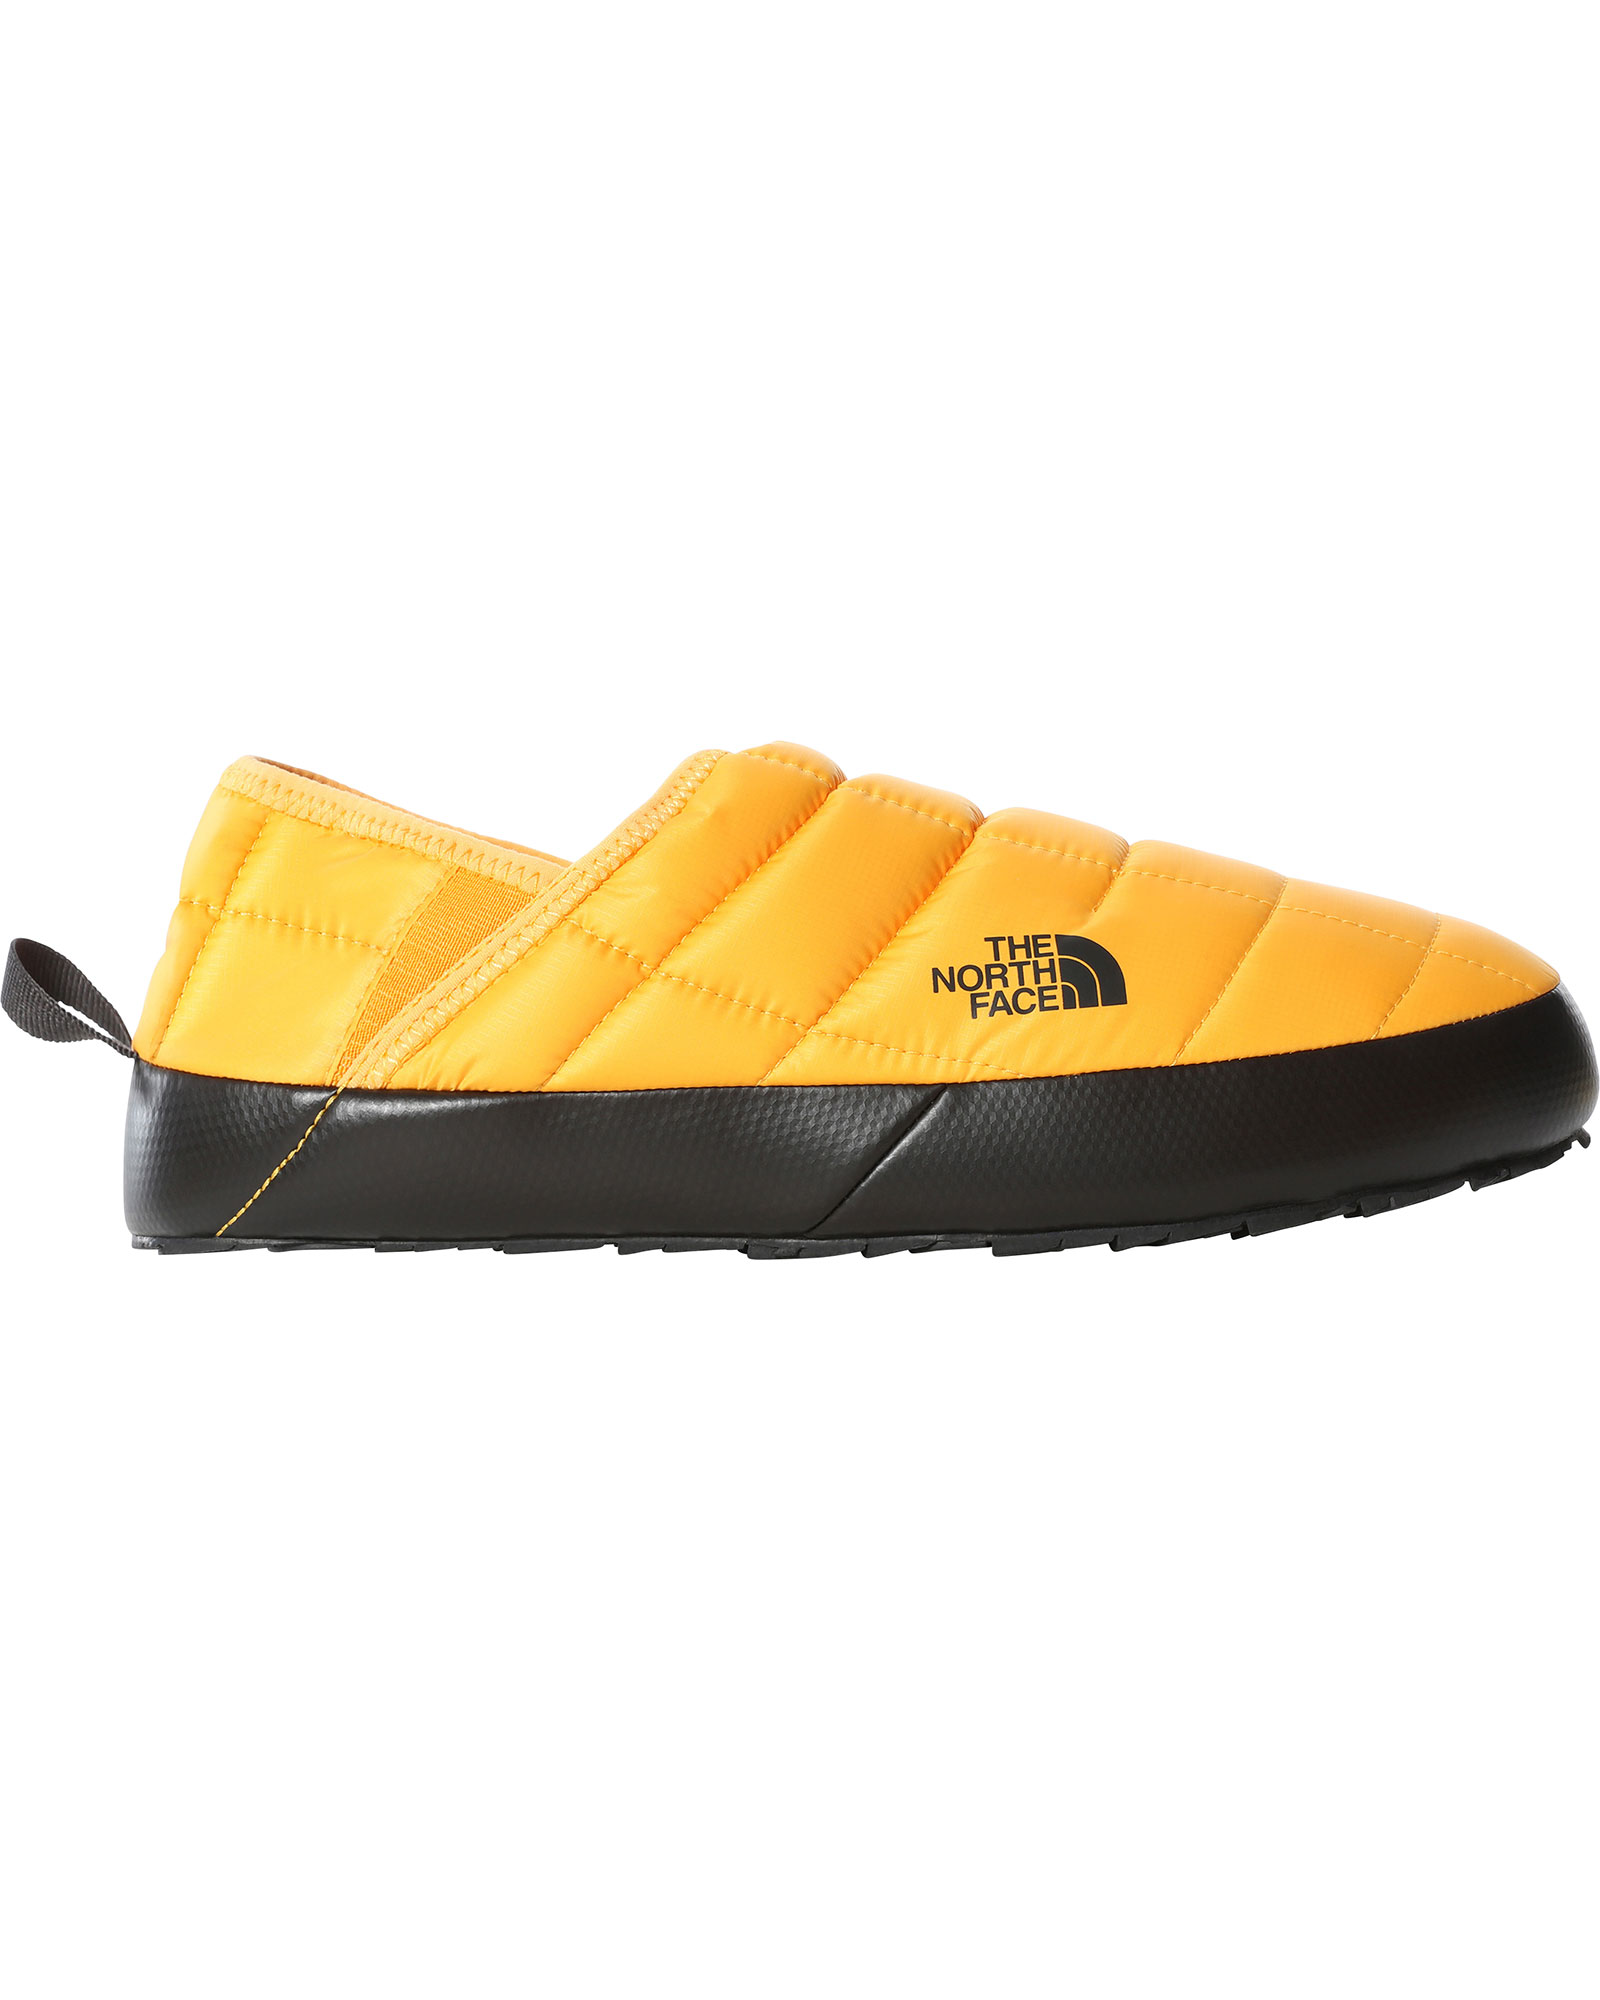 The North Face Men’s ThermoBall V Traction Mules - Summit Gold/TNF Black UK 9